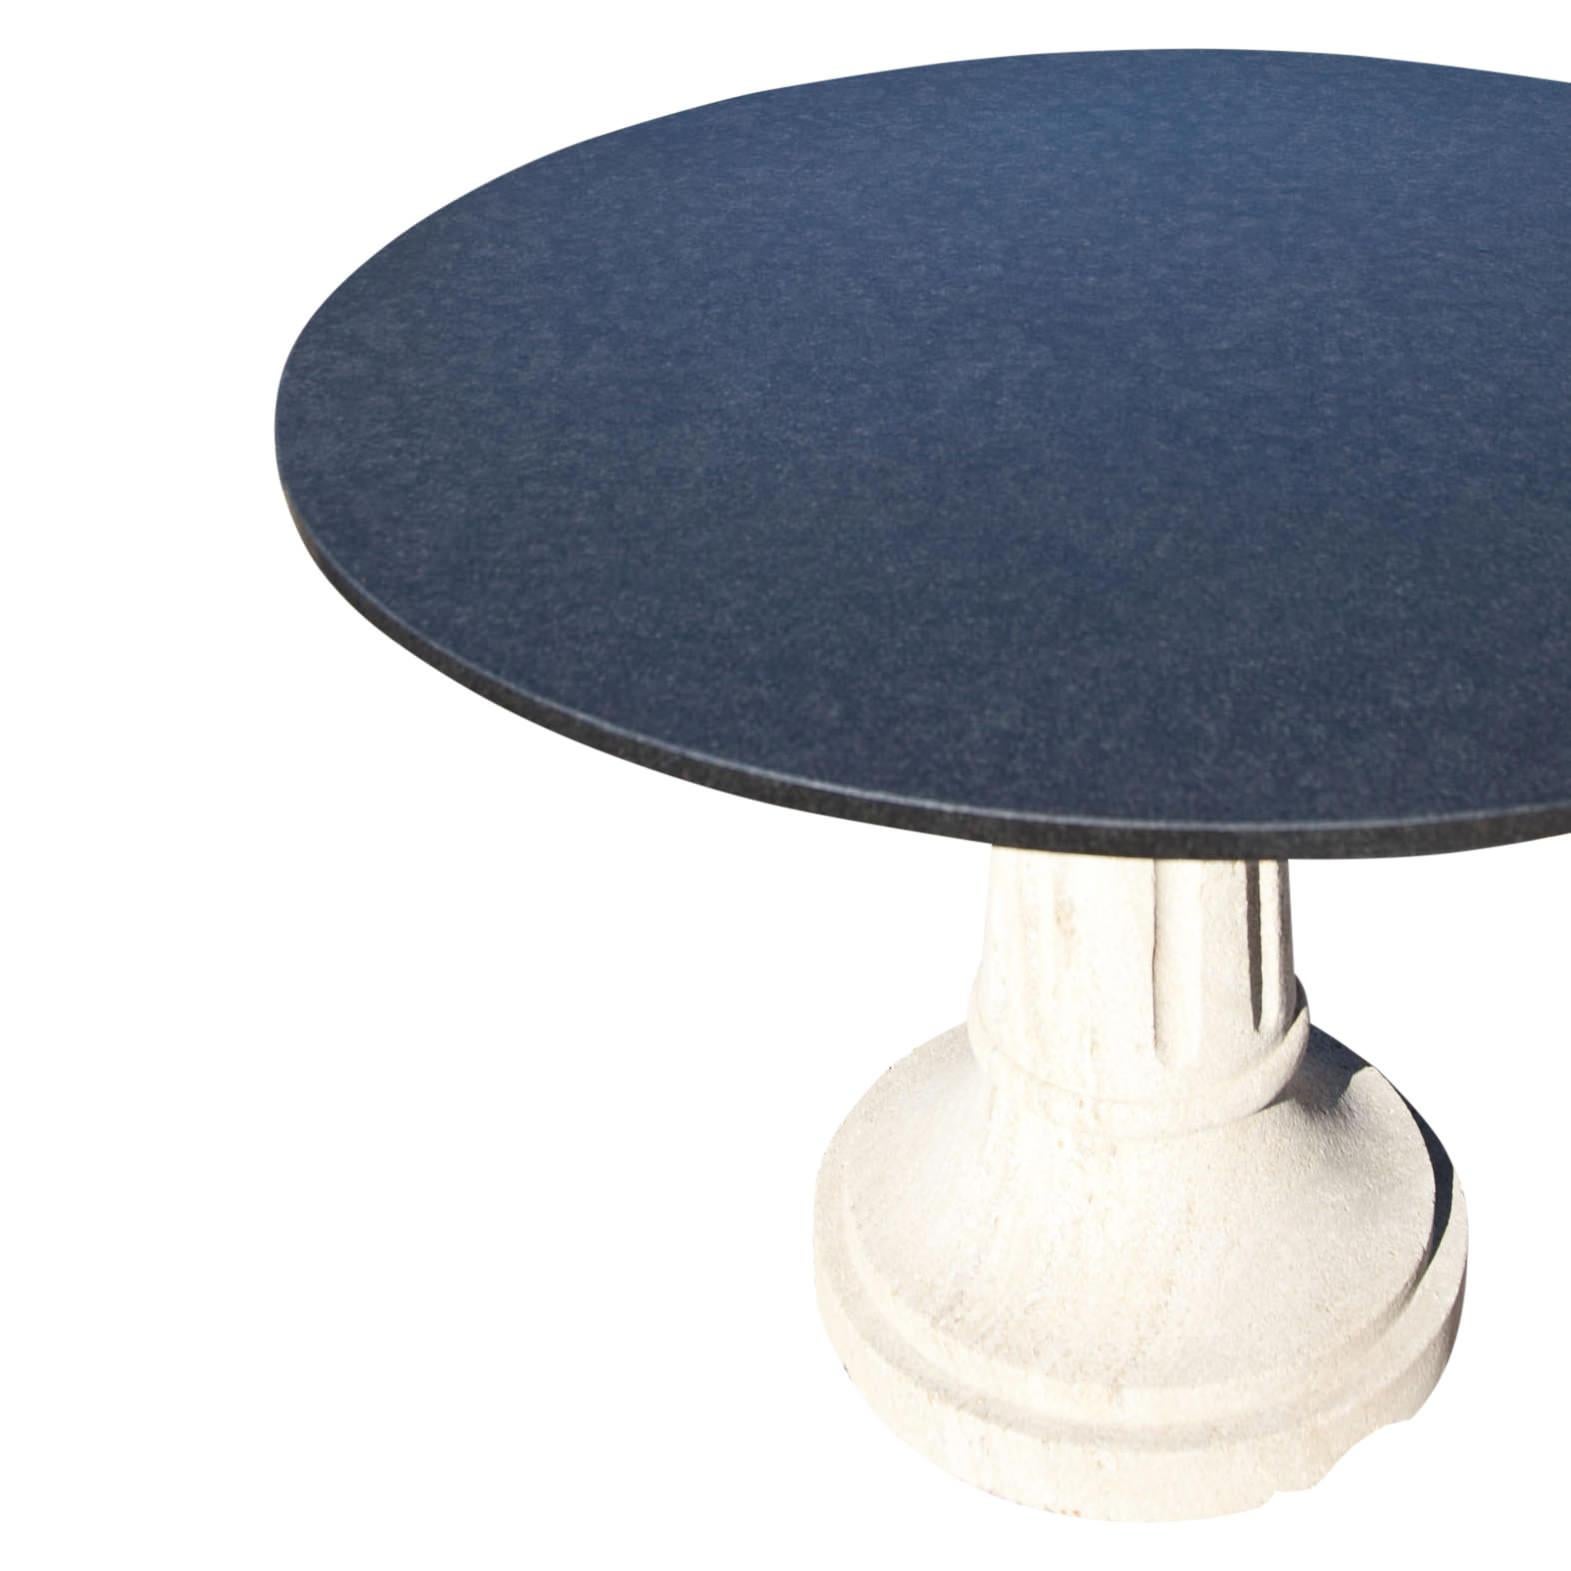 Round garden table with a black granite stone top. The likewise round foot is made of sandstone and fluted.